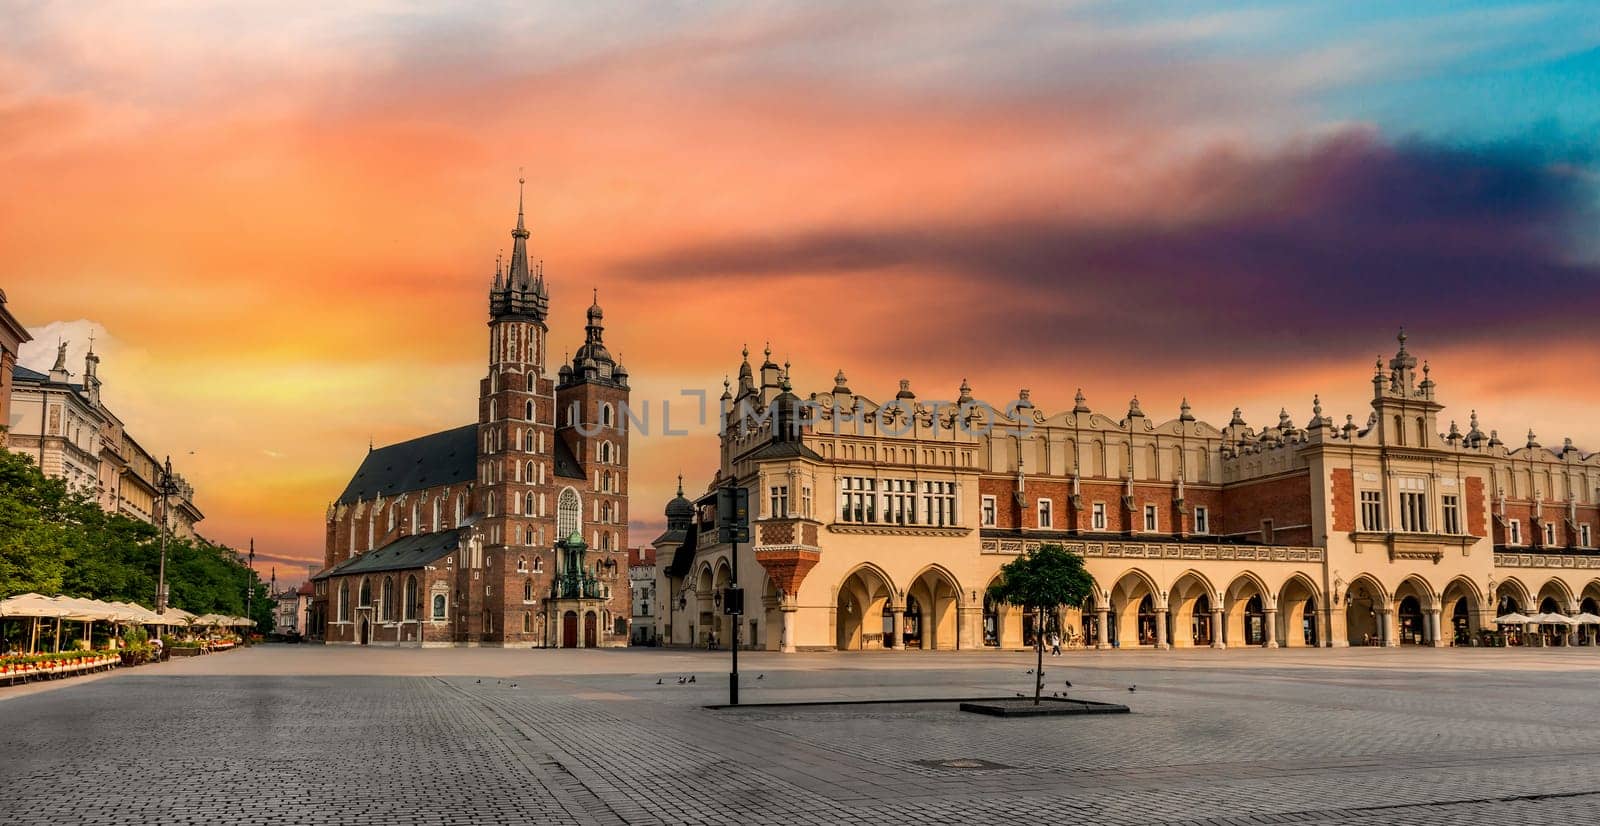 POLAND, KRAKOW- JULY 01: Breathtaking eastern european cobbled square arched building, on a cloudy day in Krakow Poland on July 01, 2015